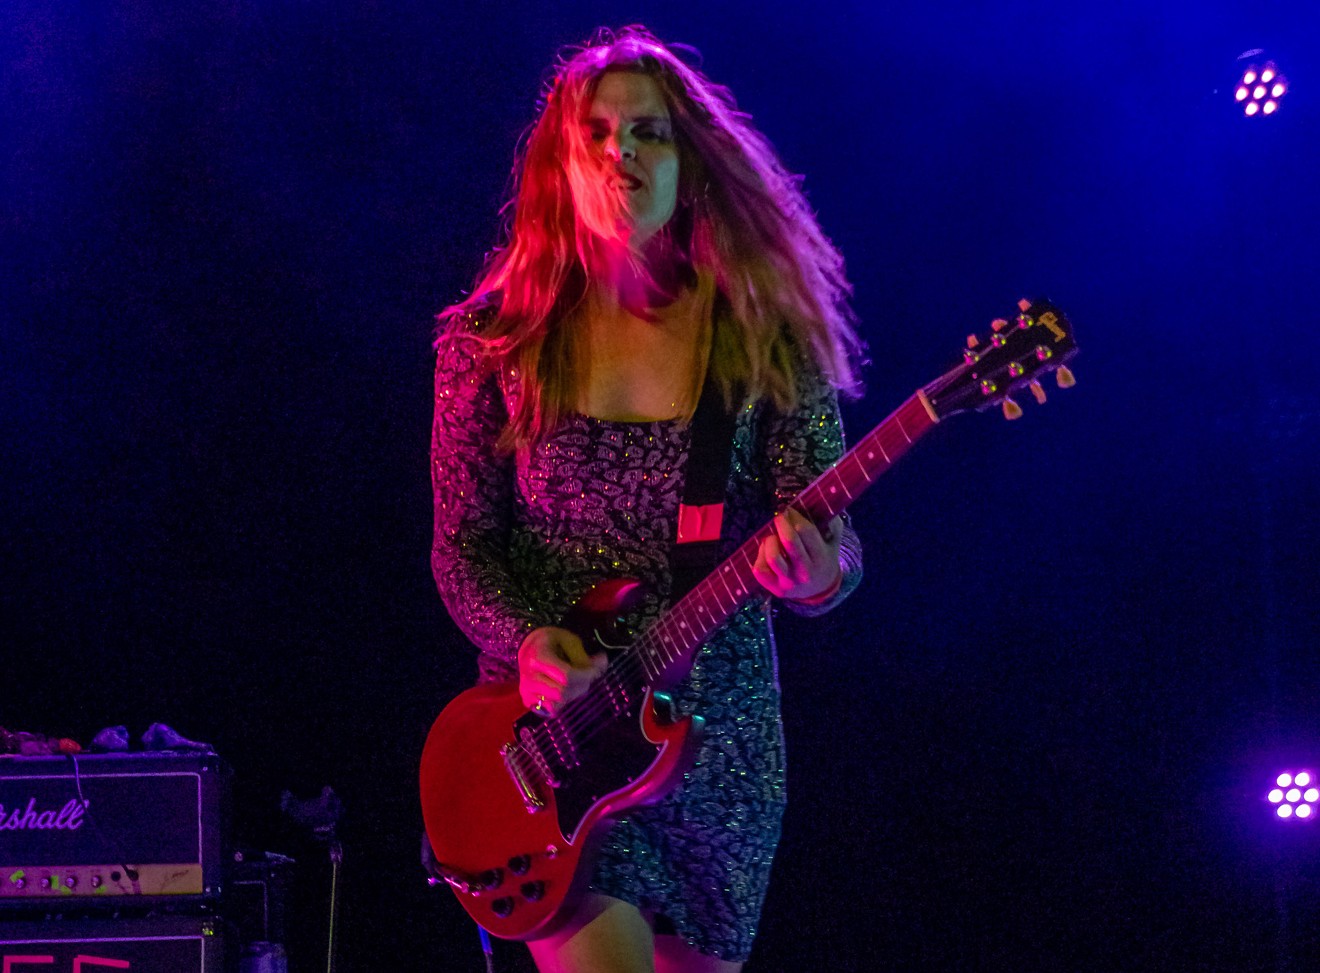 Erica Dawn Lyle performing with Bikini Kill at the Greek Theater in Los Angeles in April 2022.